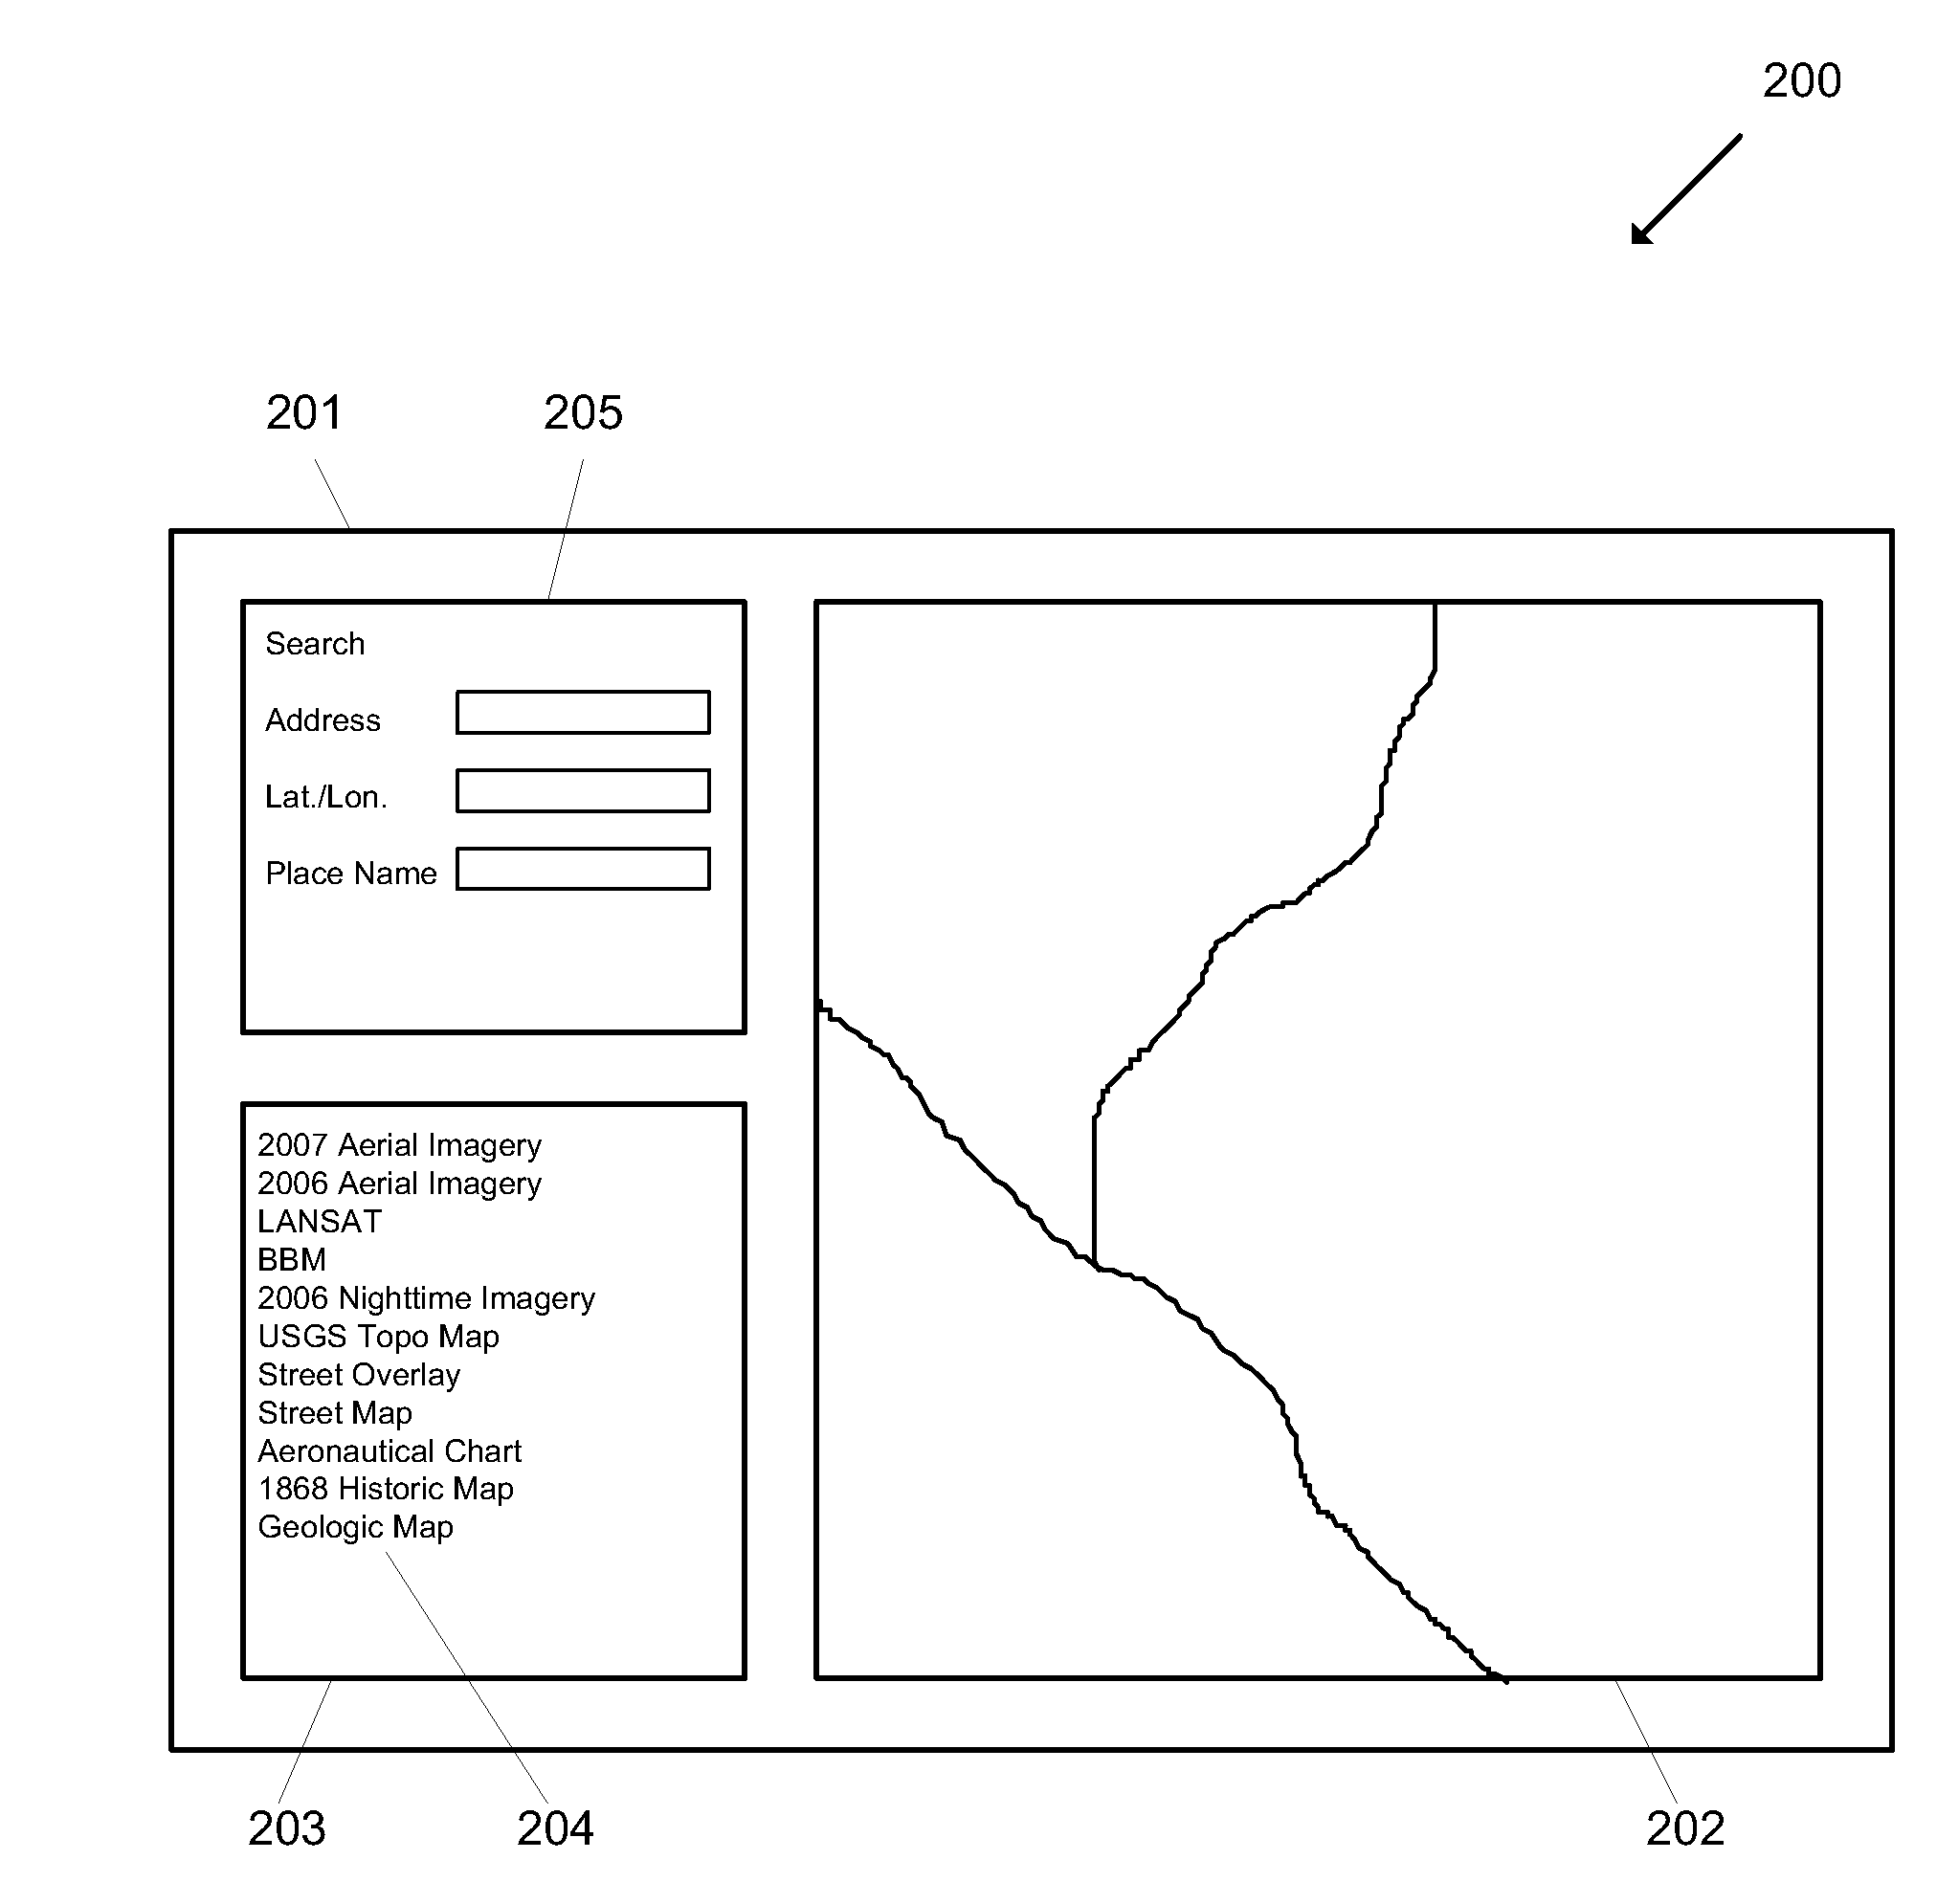 Displaying, processing and storing geo-located information